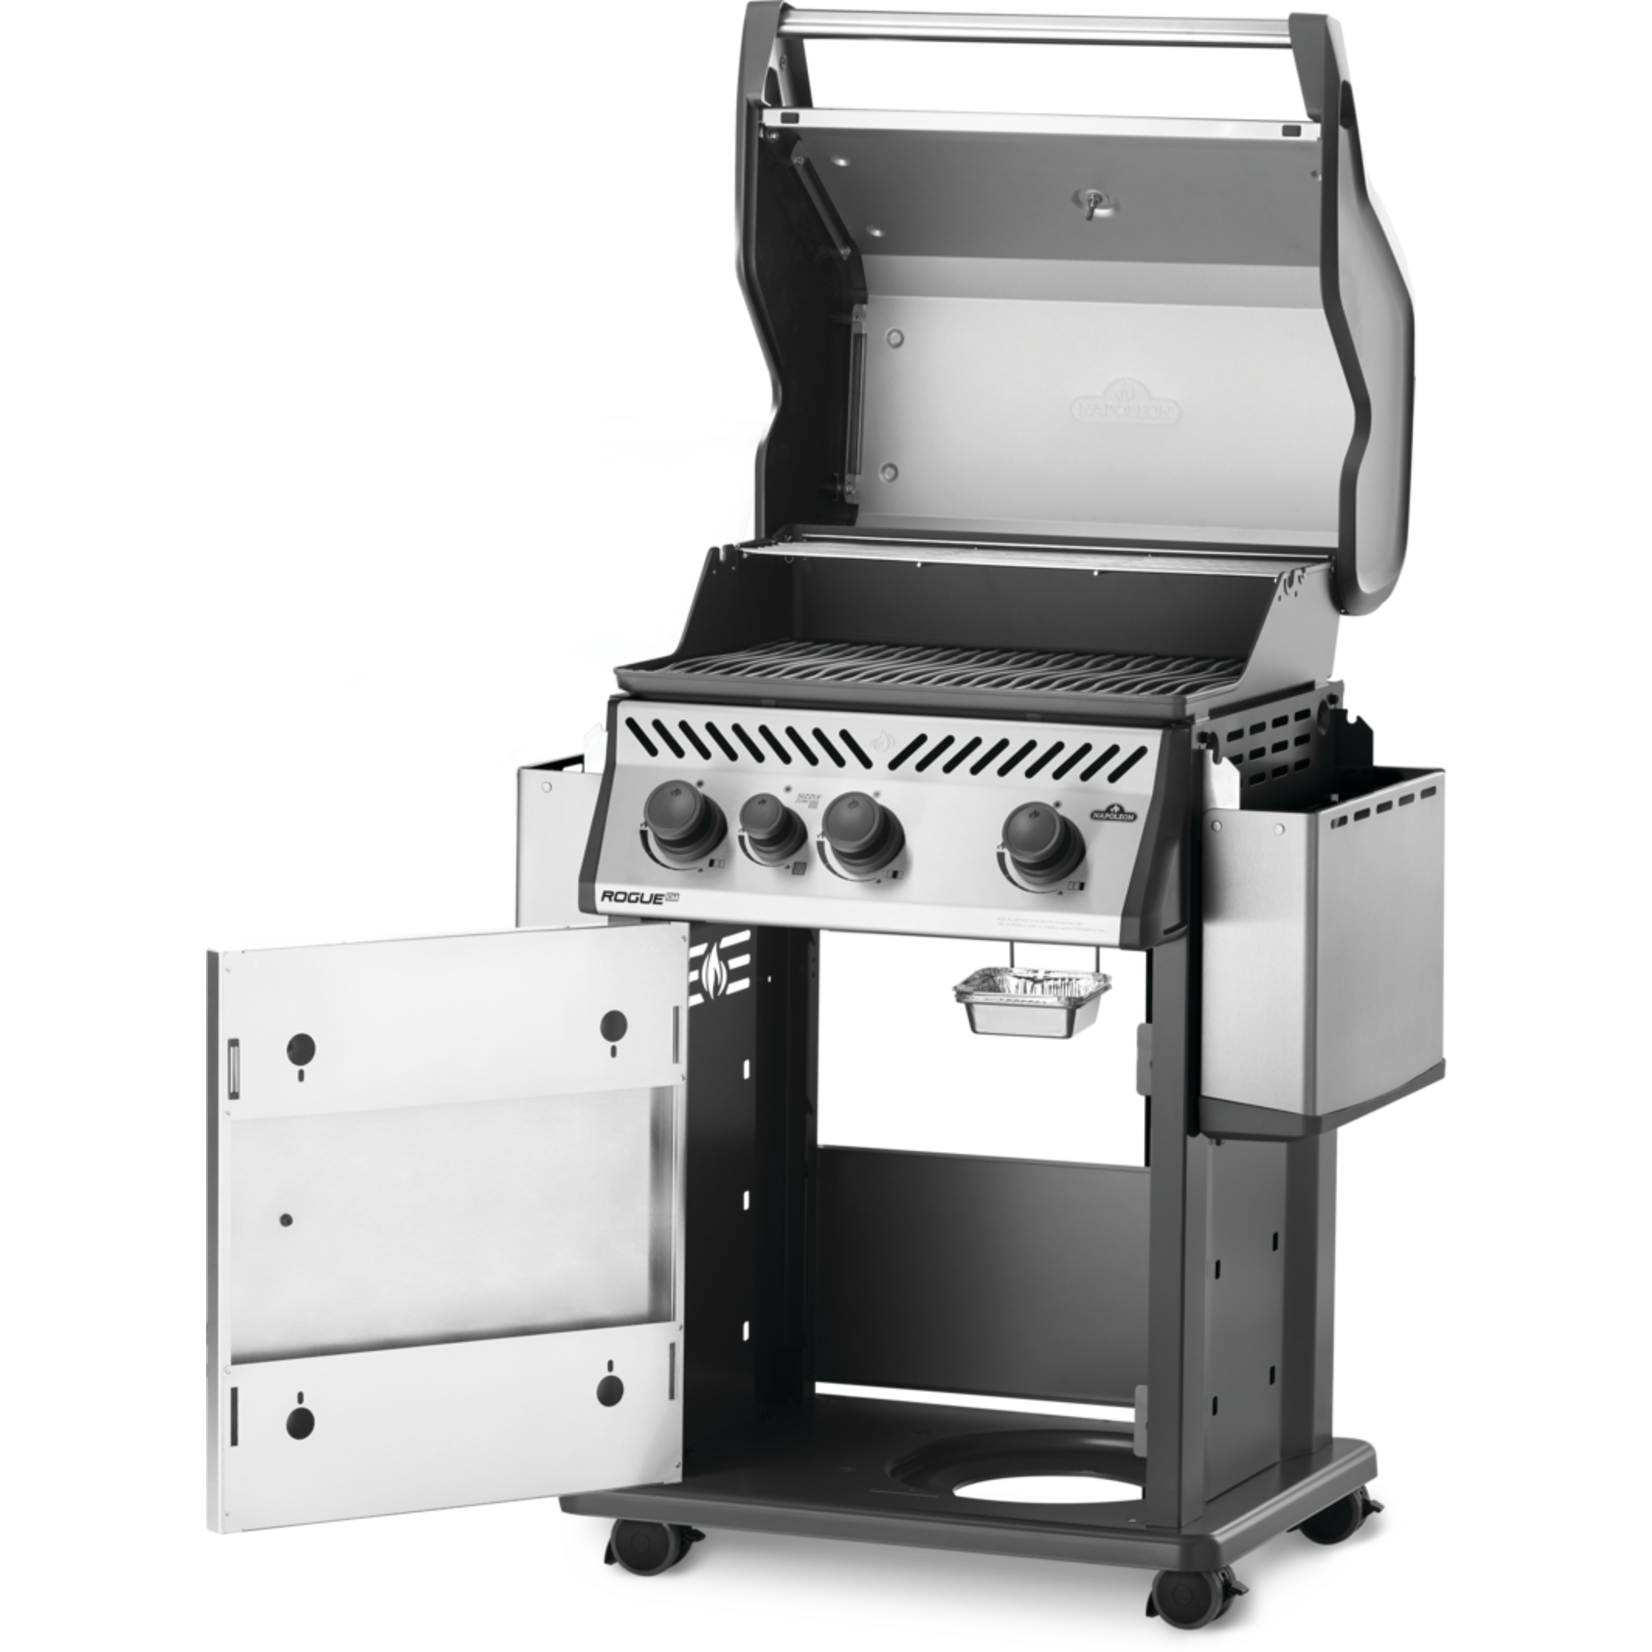 napoleon-rogue-xt-425-natural-gas-grill-with-infrared-side-burner